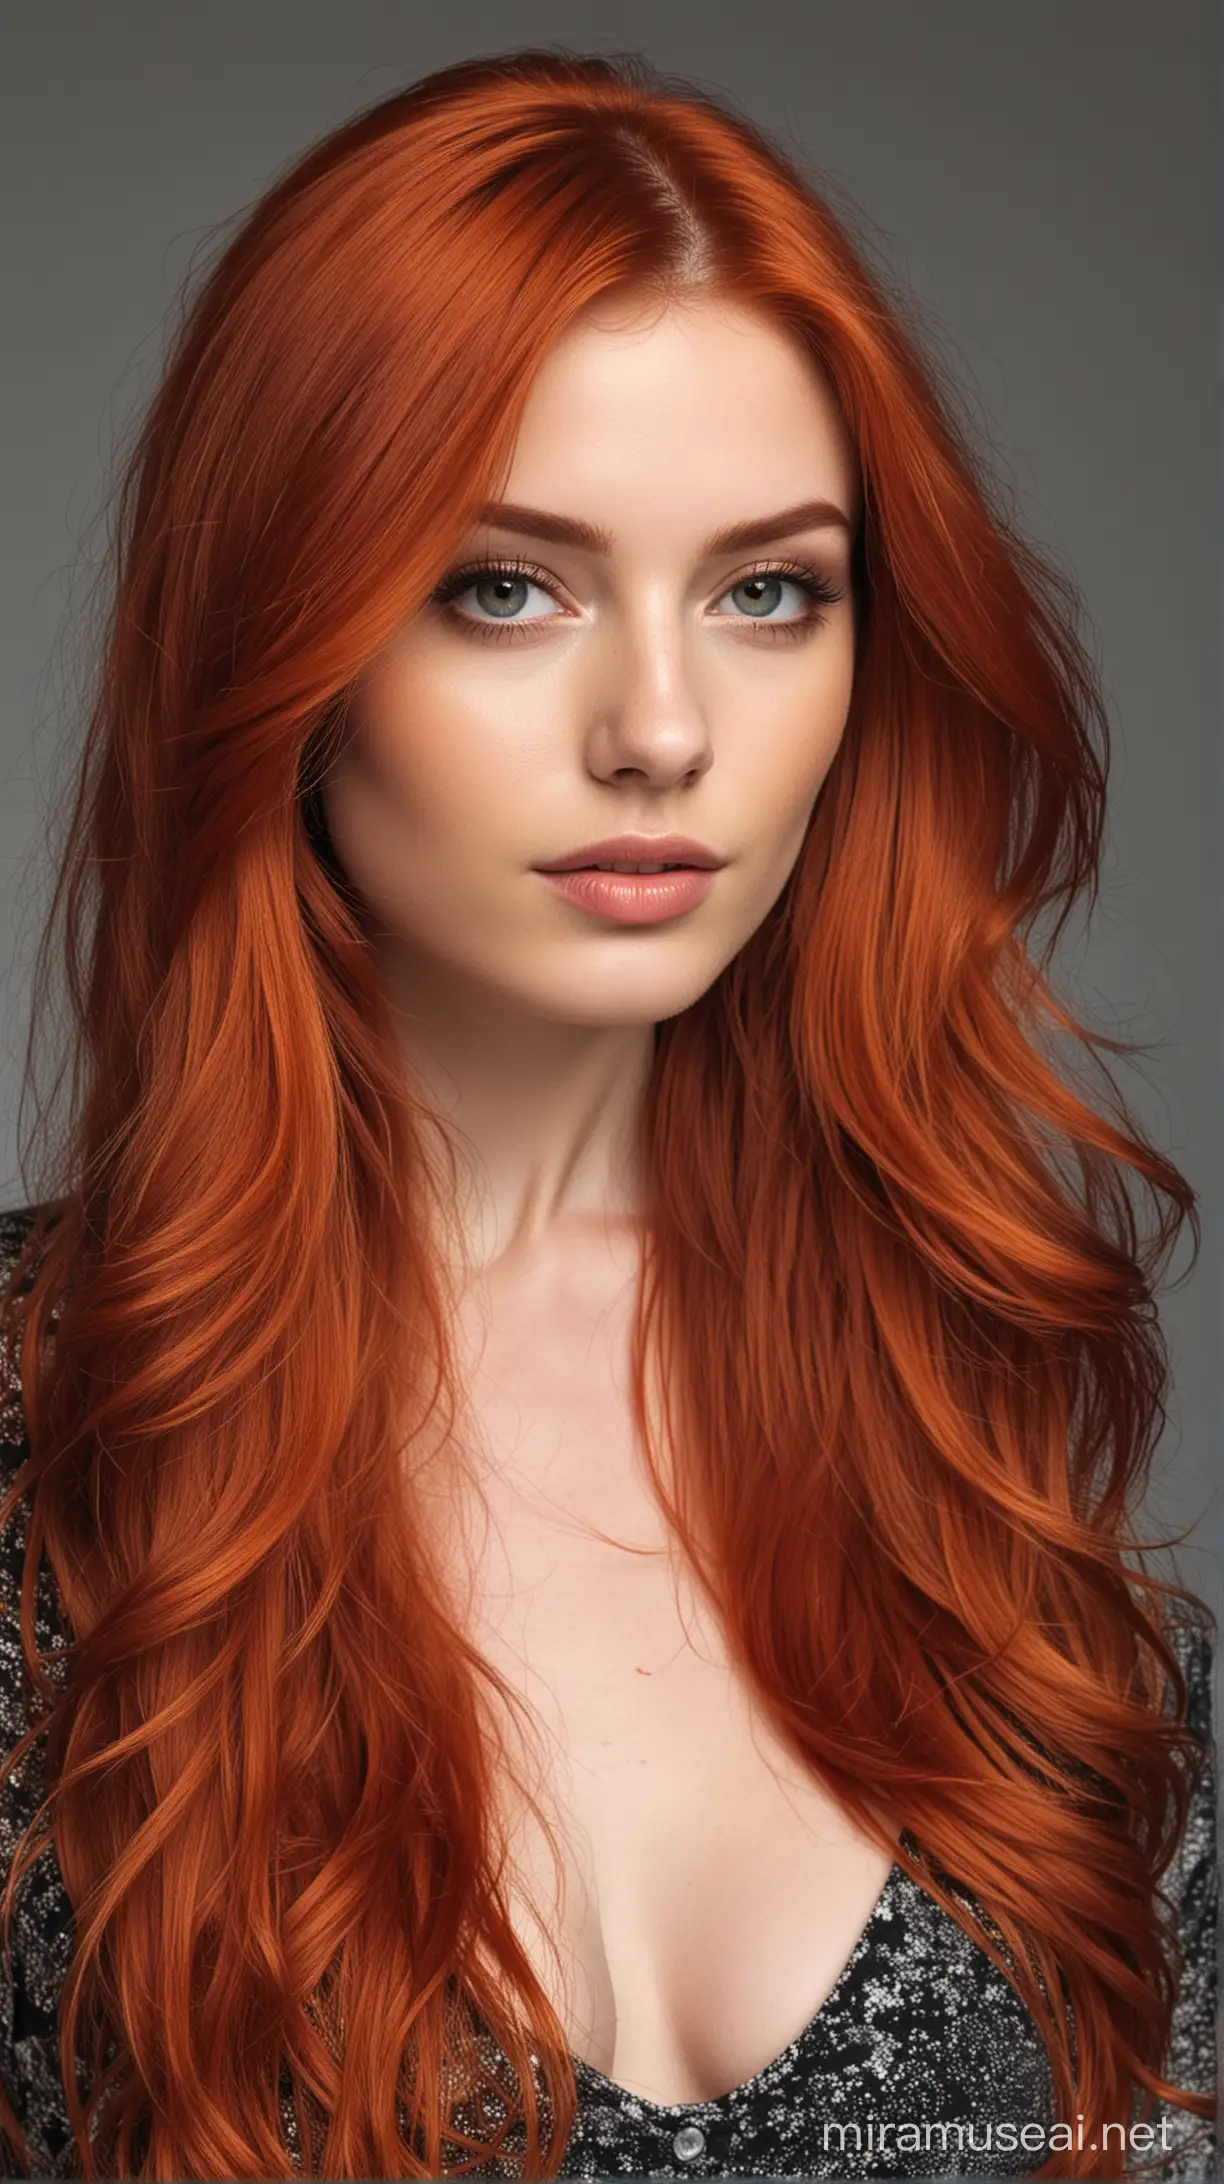 Beautiful model with stunning copper red hair